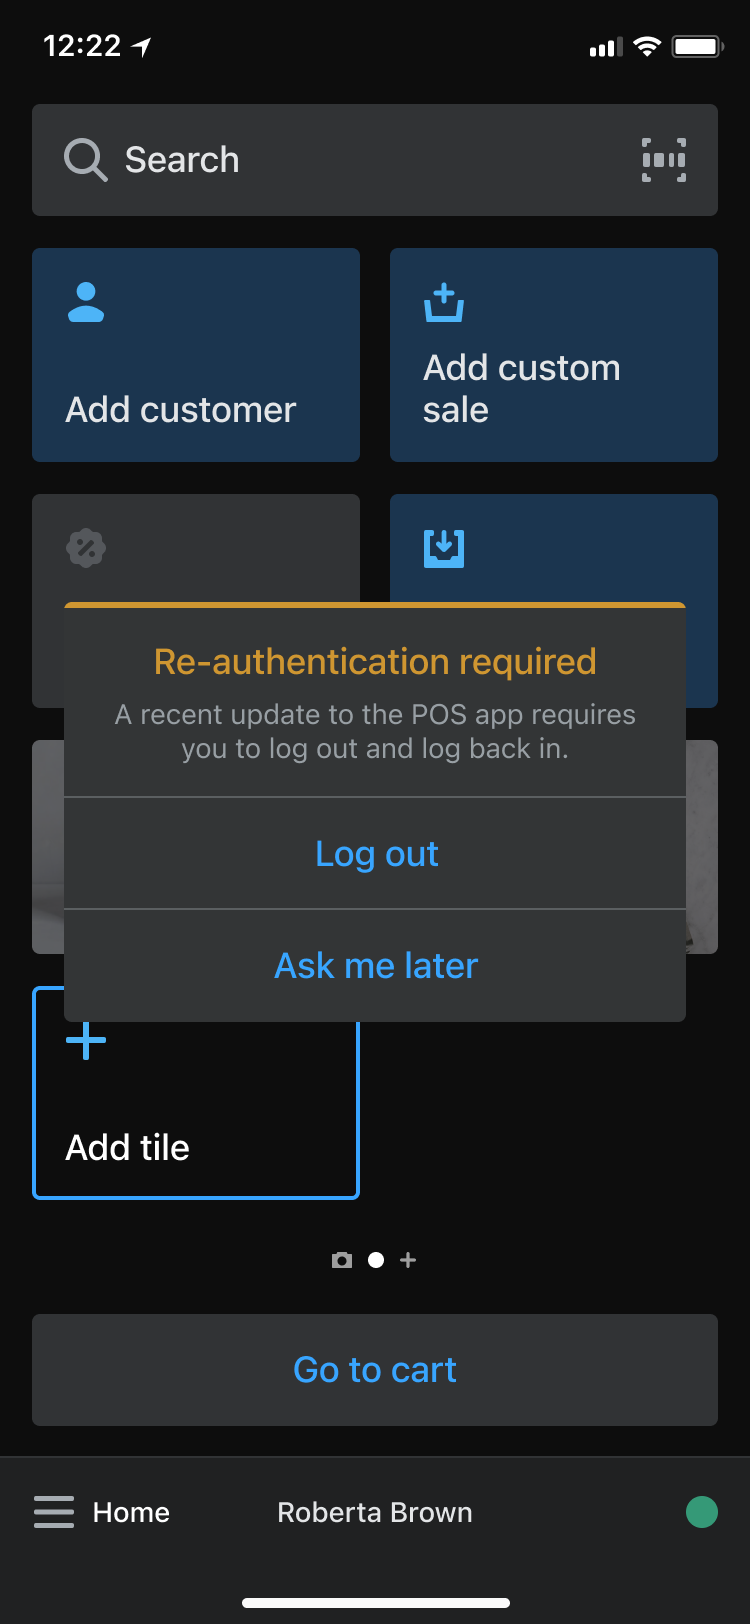 A screen prompts a user to log out and log in again from an app to re-authenticate